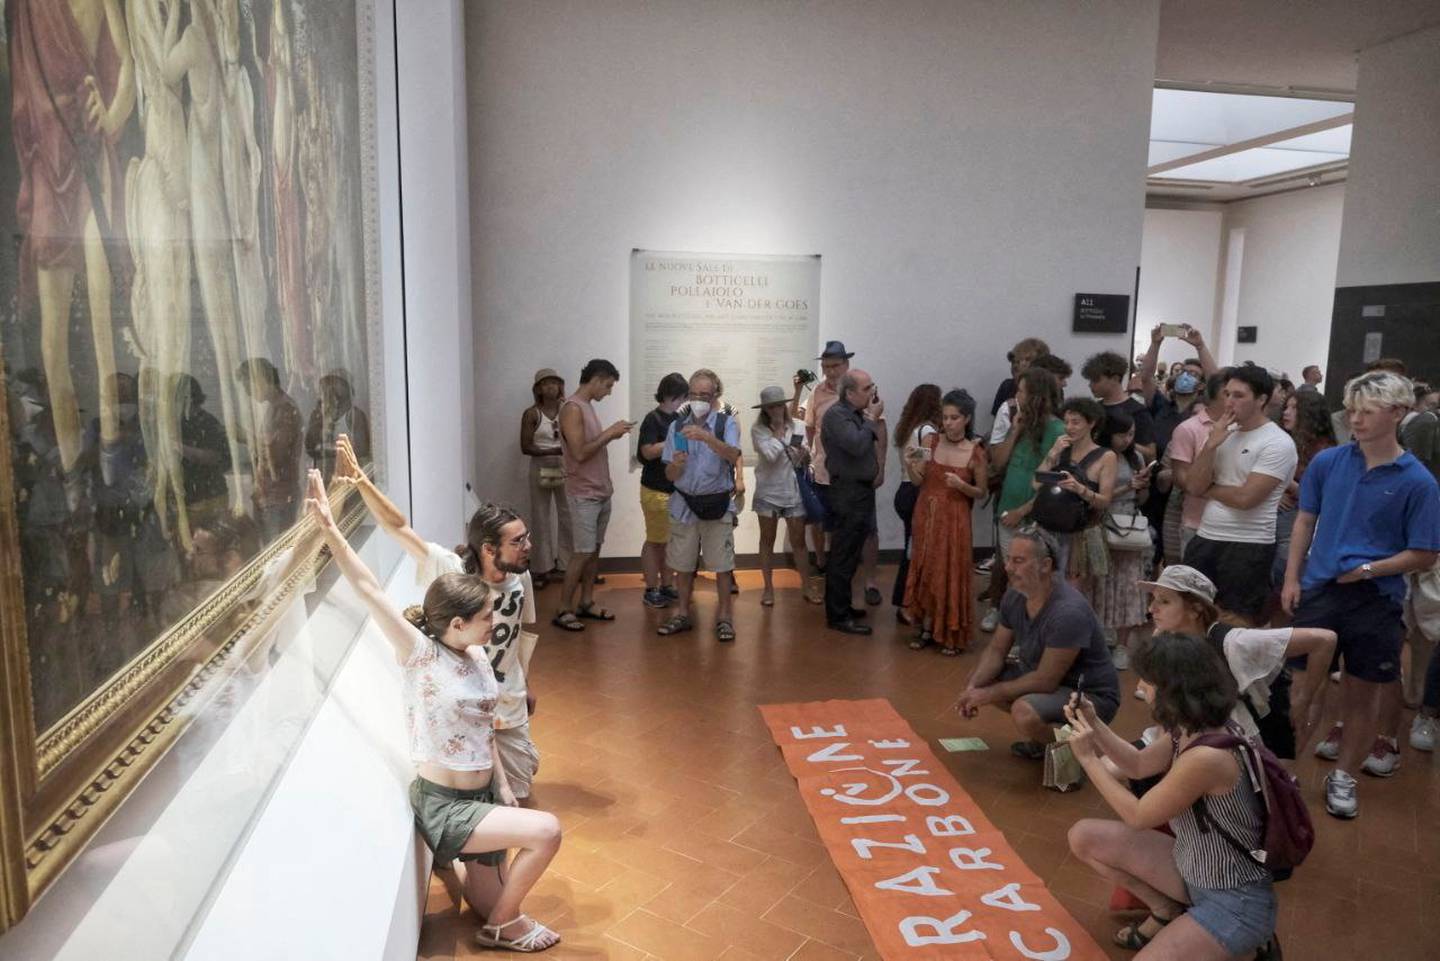 Protesters glue themselves to Botticelli's 'Primavera' in the Uffizi Gallery, in Florence, Italy. Photo: Reuters